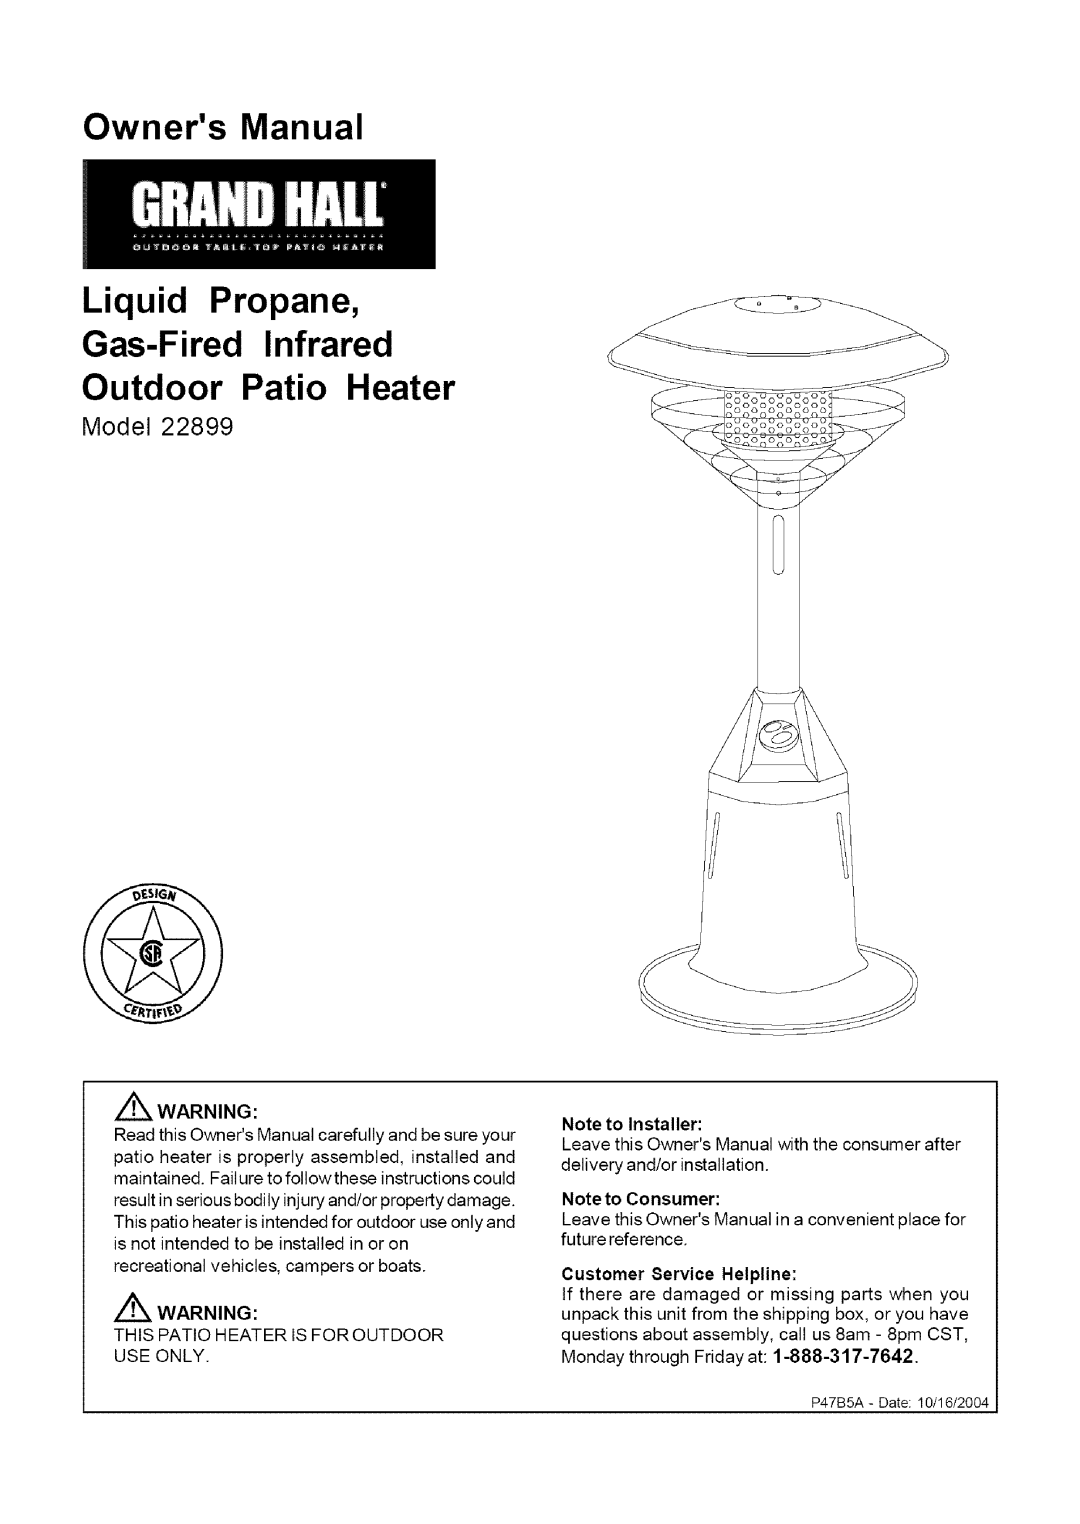 Grand Hall 22899 owner manual Outdoor Patio Heater, Z Warning, Note to Installer, Note to Consumer 